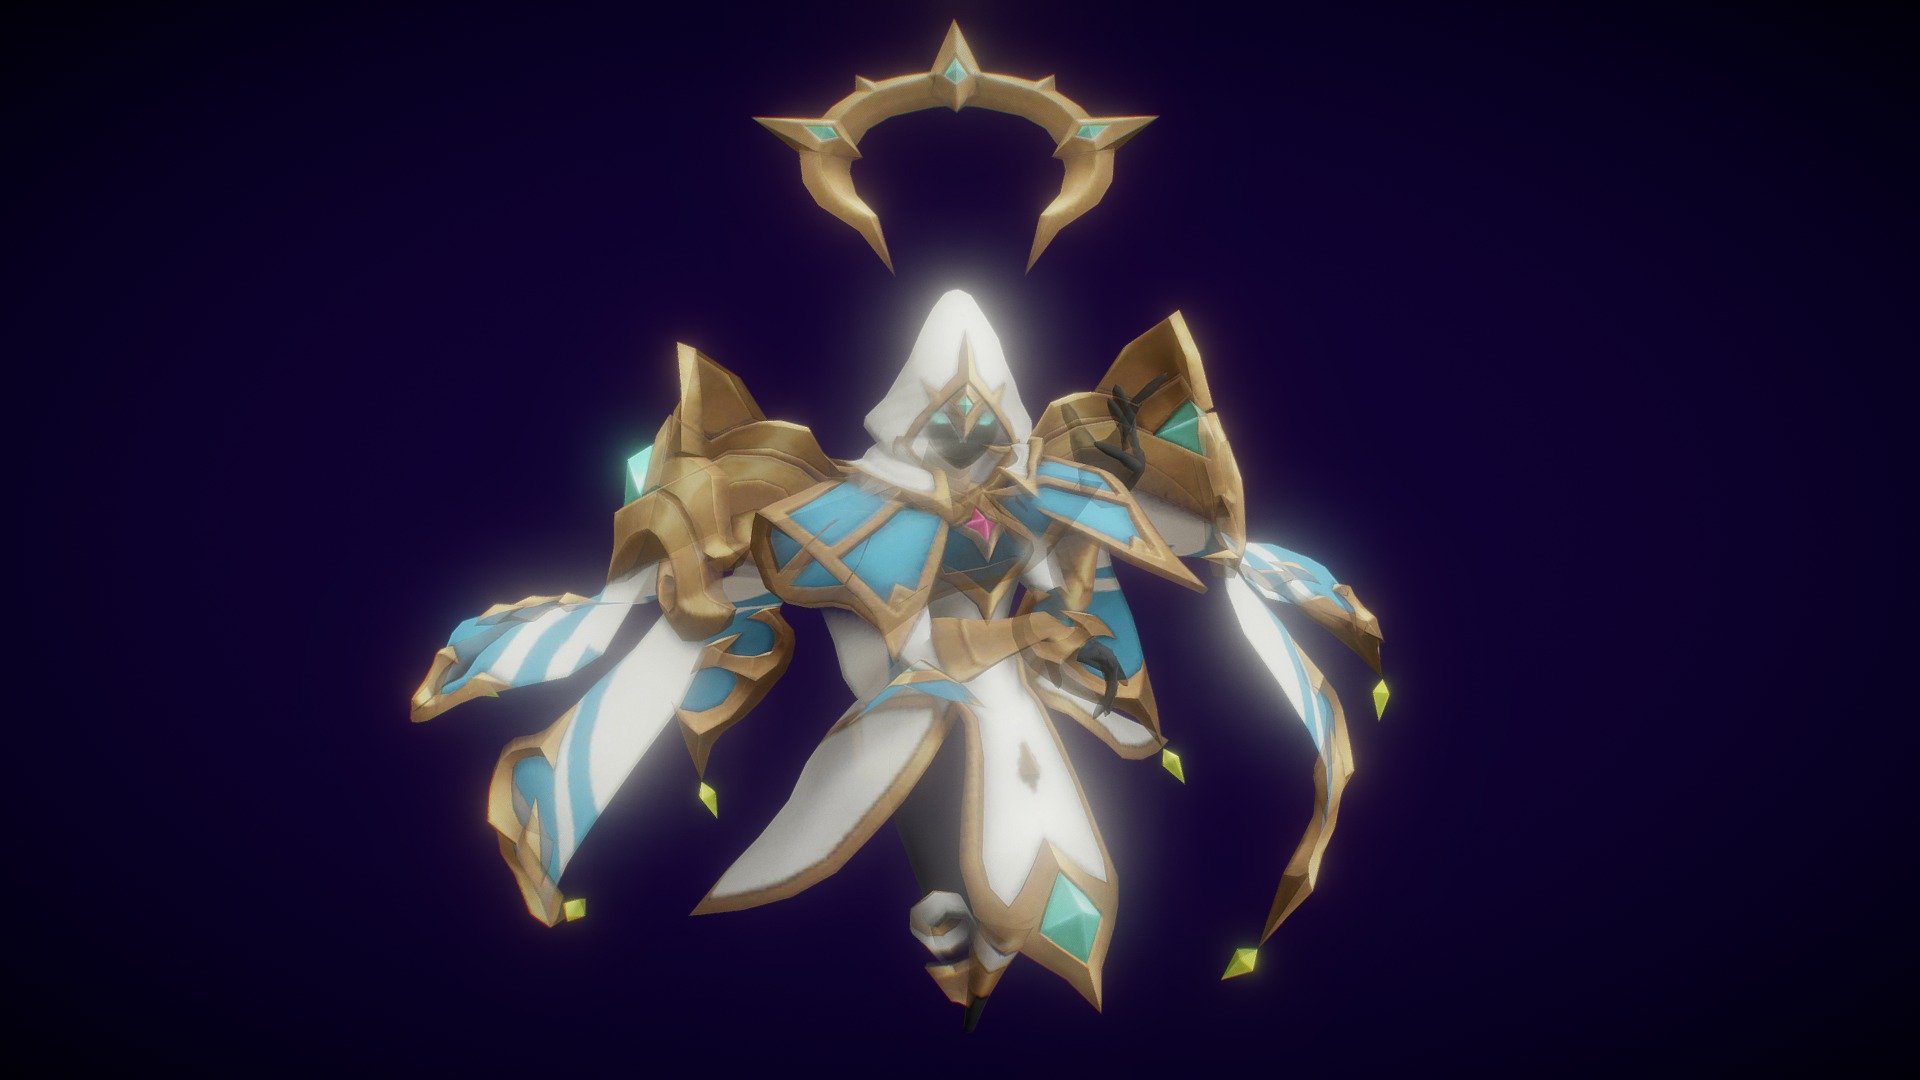 Low poly model of Seraph is typically depicted as a benevolent and ethereal being with wings, dressed in flowing robes or garments symbolizing purity and divine grace.
The style cartoon 3D. The model use the same texture and material, Blender, Substance Painter - Seraph - Buy Royalty Free 3D model by Luna (@StudioLuna) 3d model